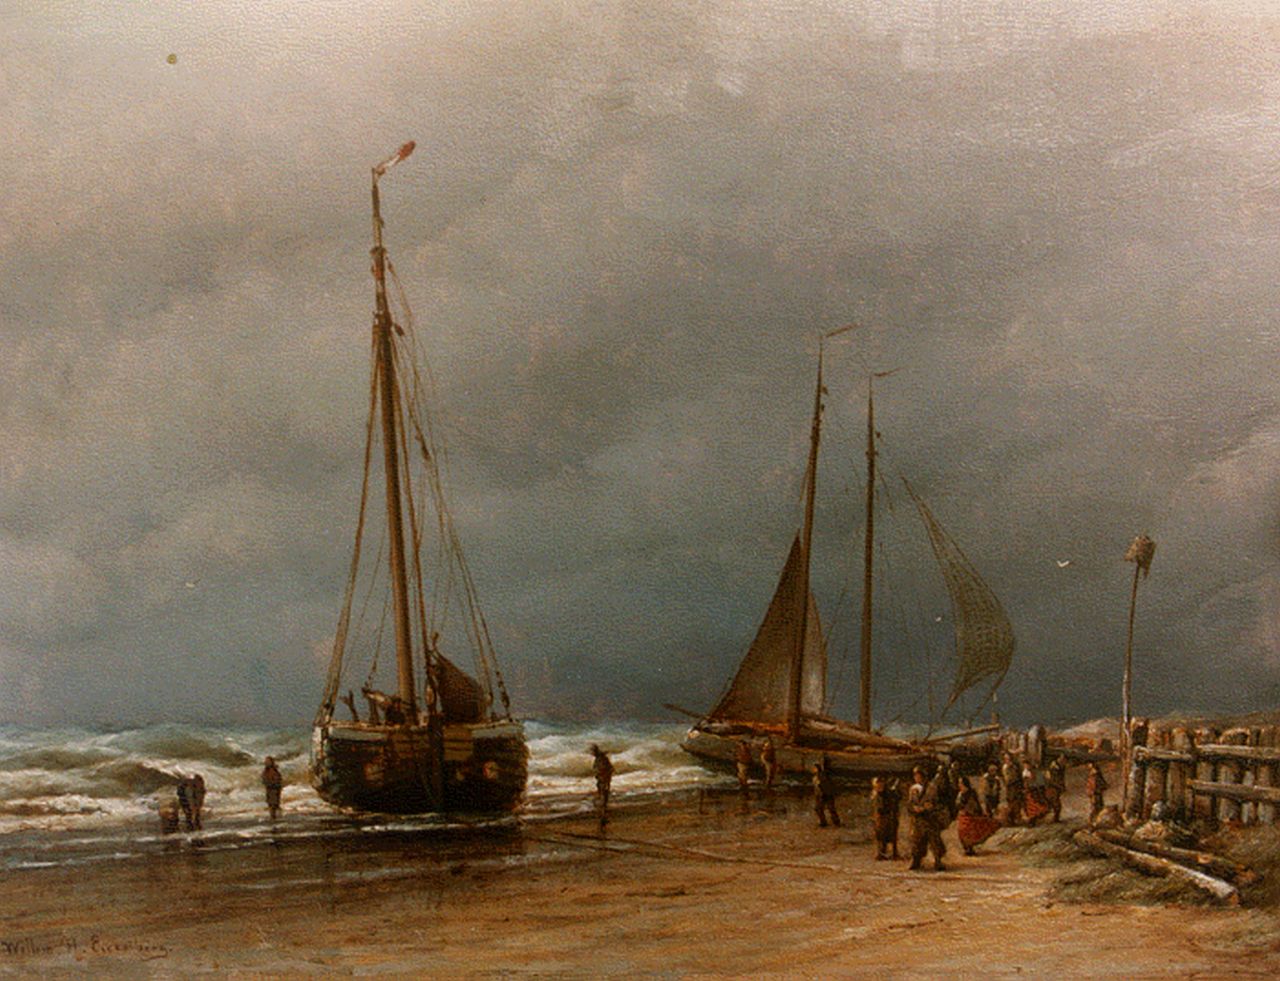 Eickelberg W.H.  | Willem Hendrik Eickelberg, Flatboats on the beach, oil on panel 31.3 x 41.0 cm, signed l.l.